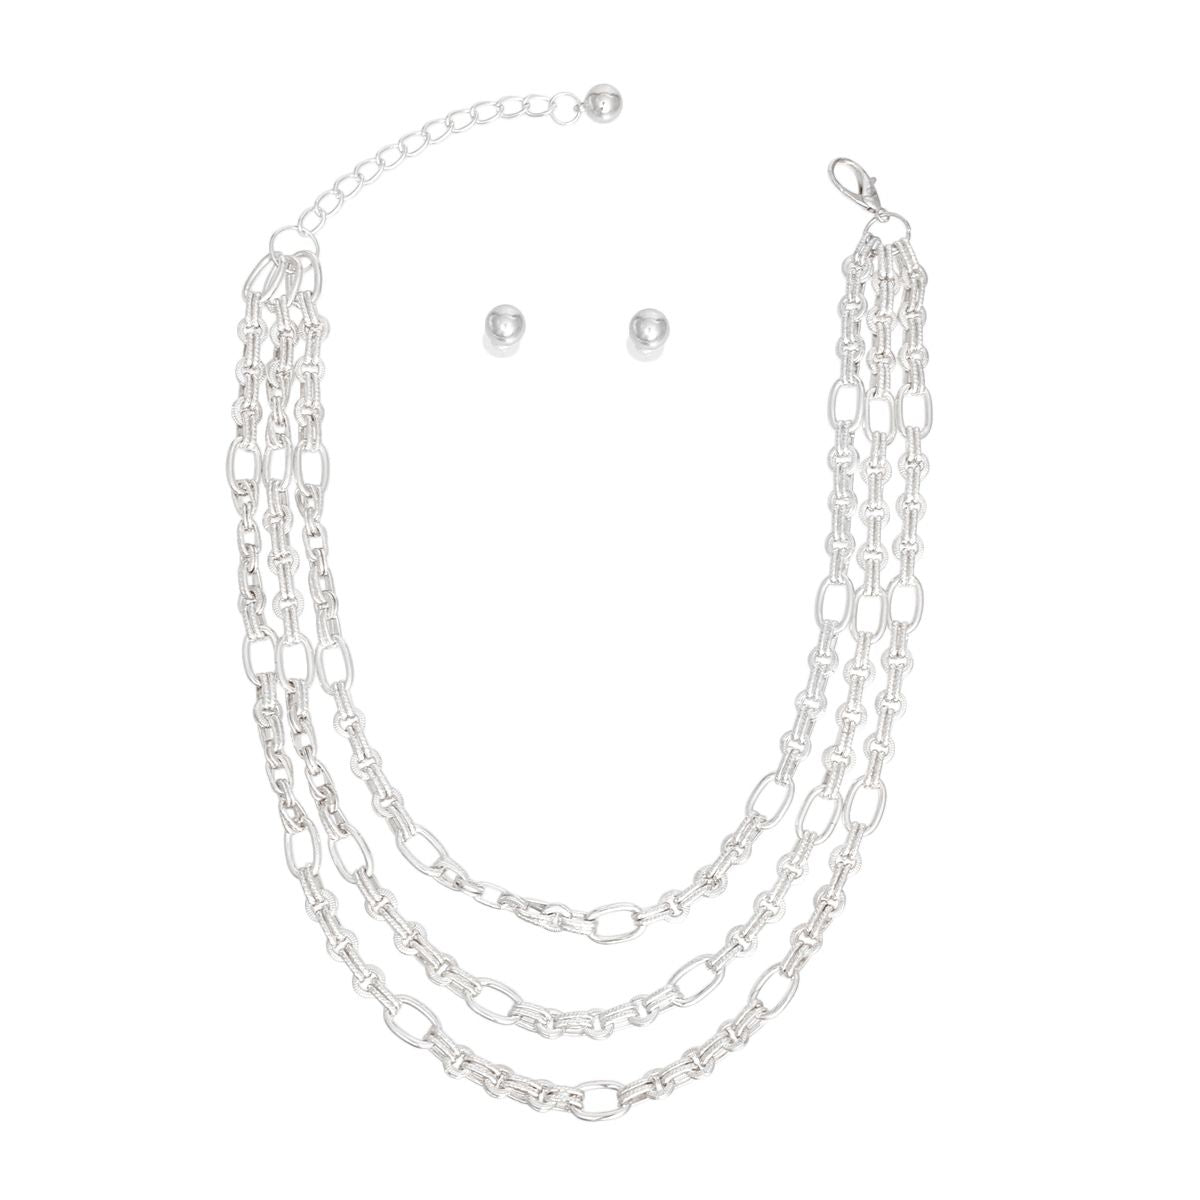 Necklace Silver Triple Chain Link Set for Women